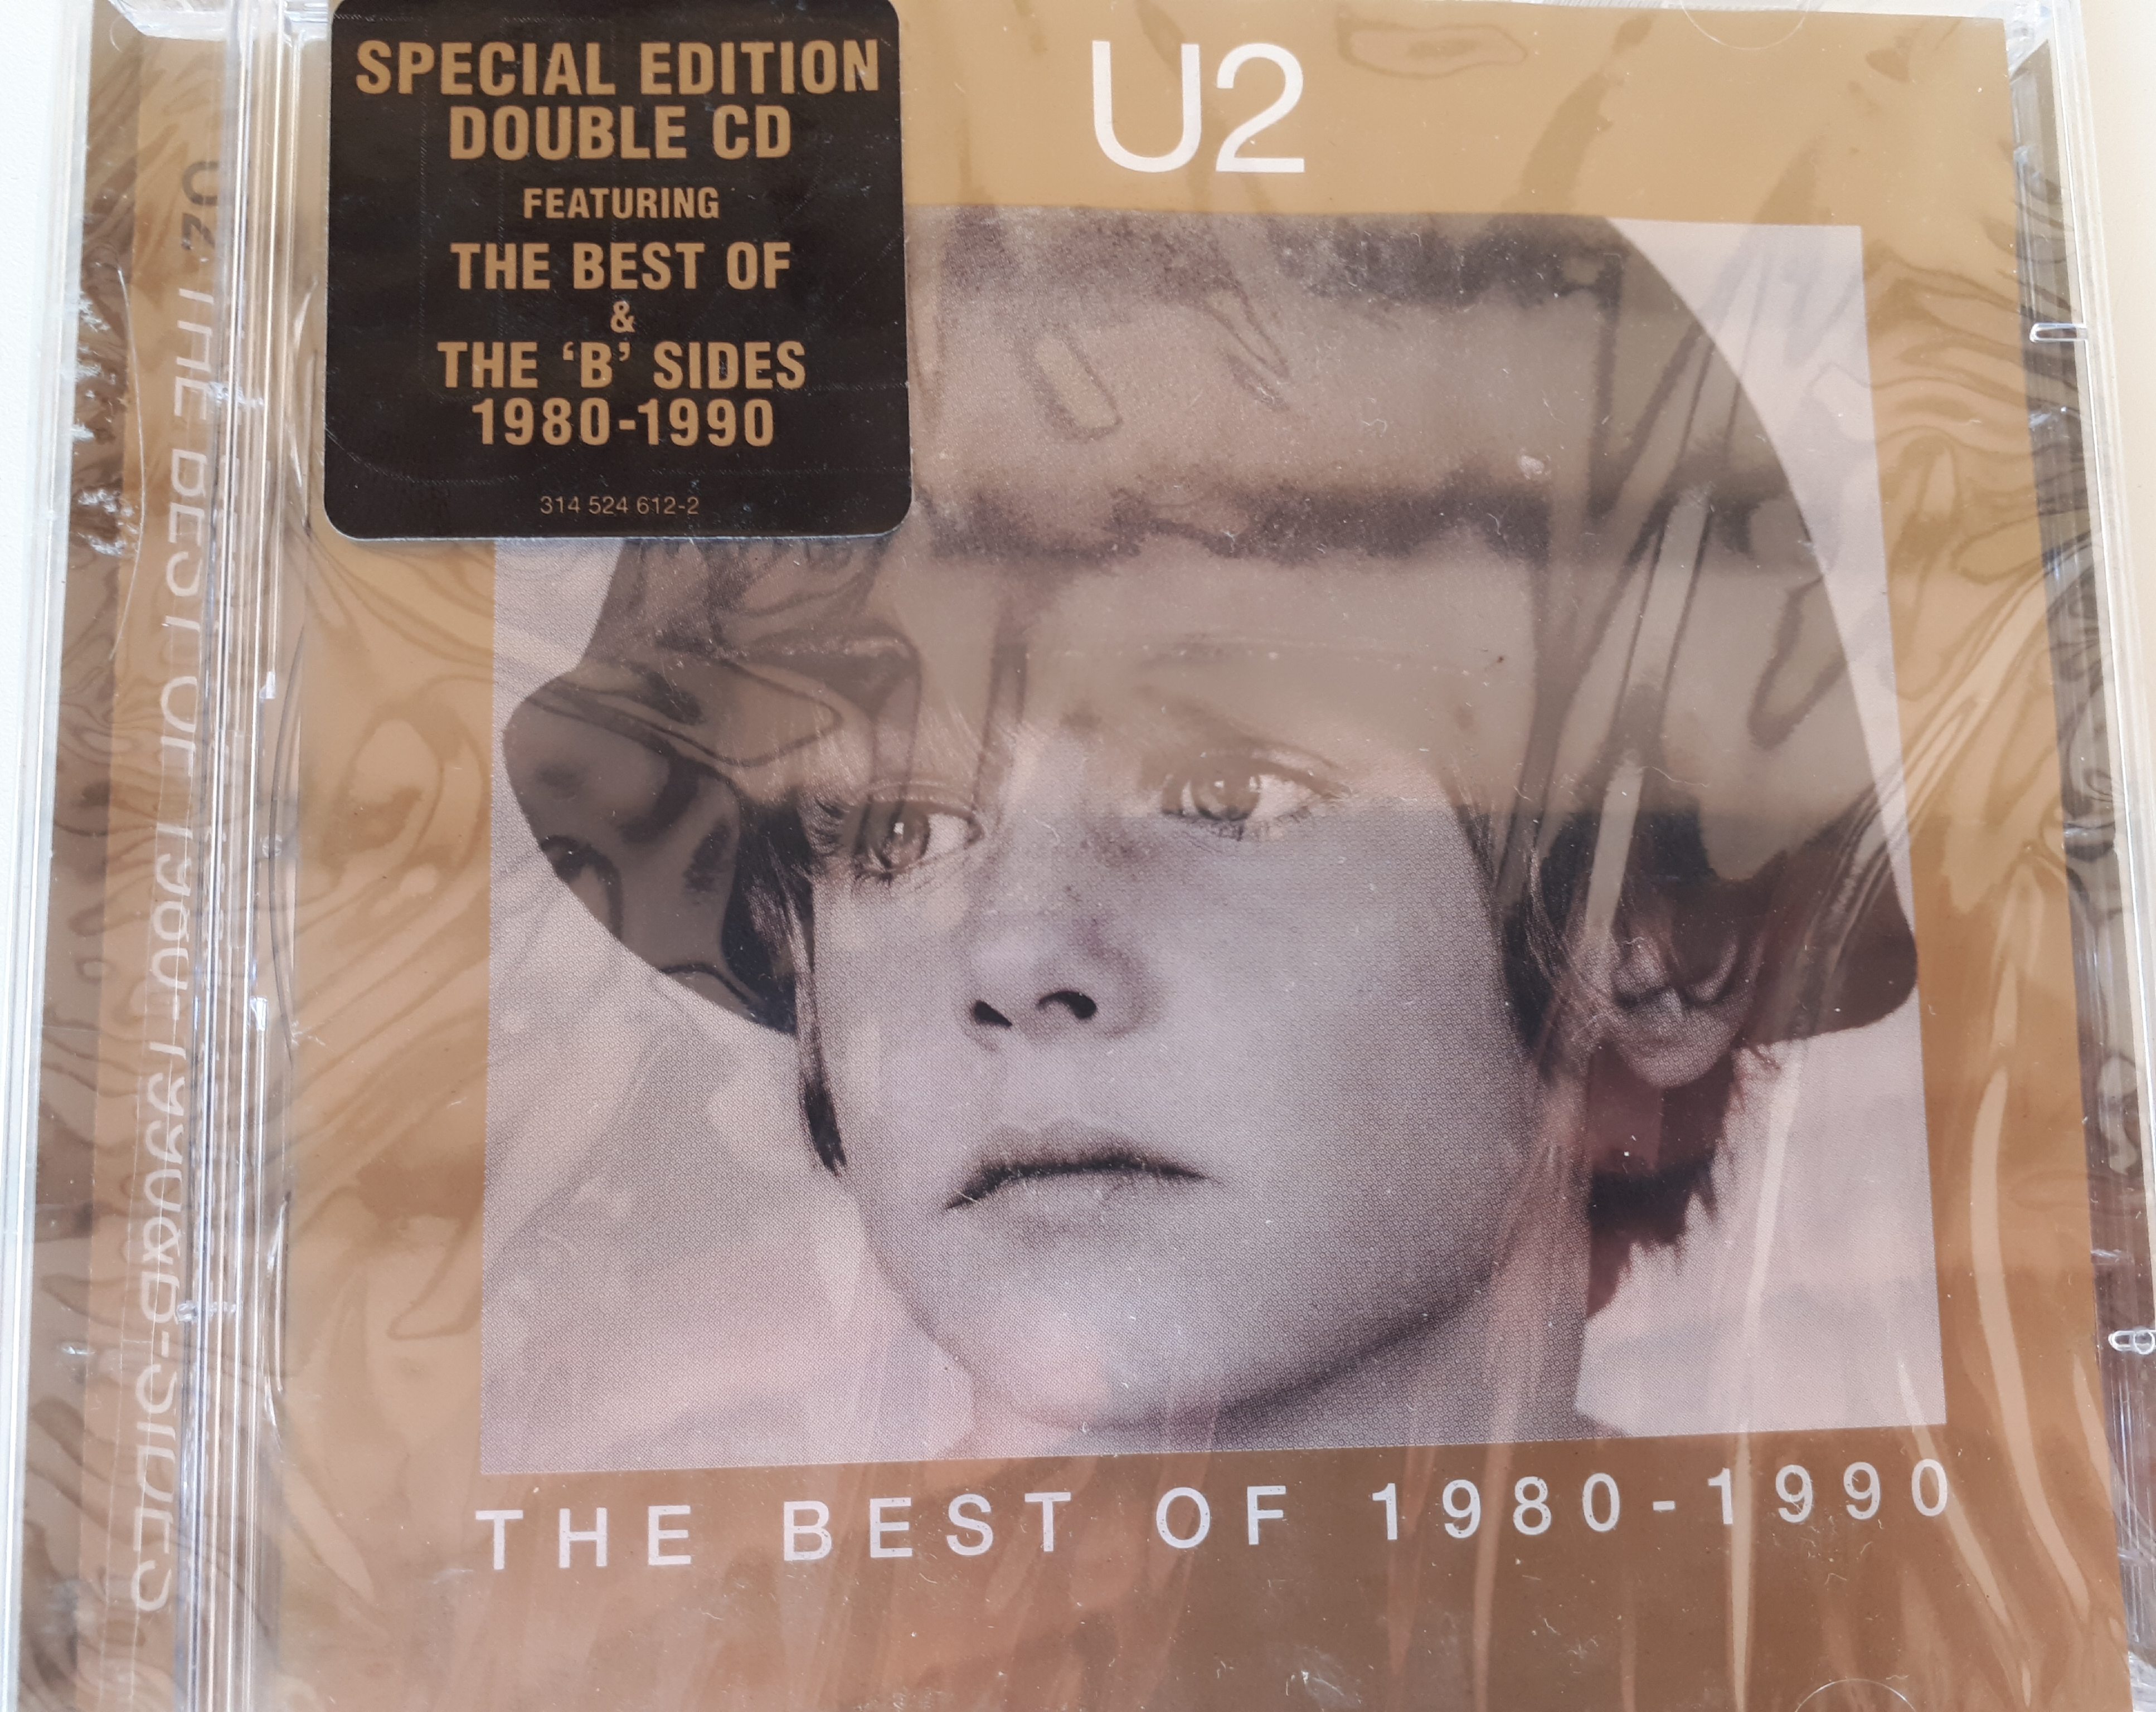 U2 - The Best Of 1980-1990 & B-Sides (2CD Numbered)